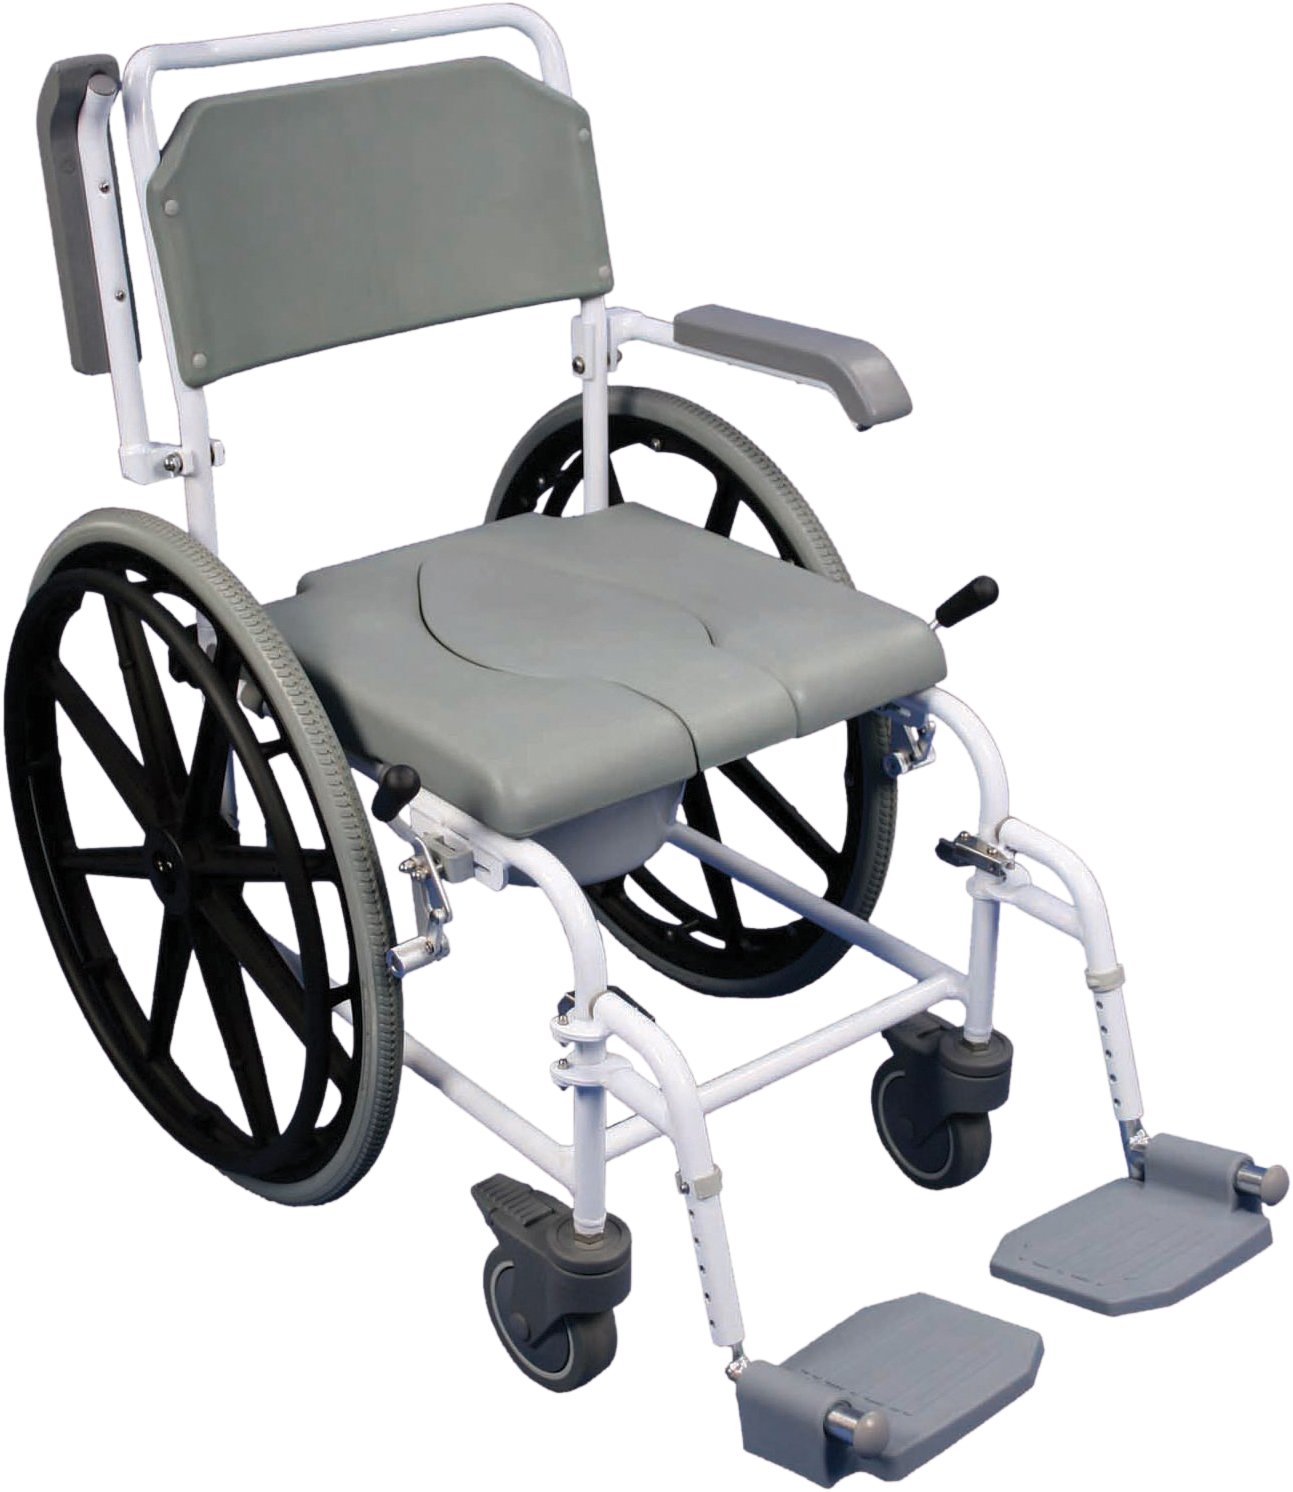 Self Propelled Shower Commode Chair, Bathroom Assistive Device, Waterproof Wheelchair, Bathroom Mobility Solutions